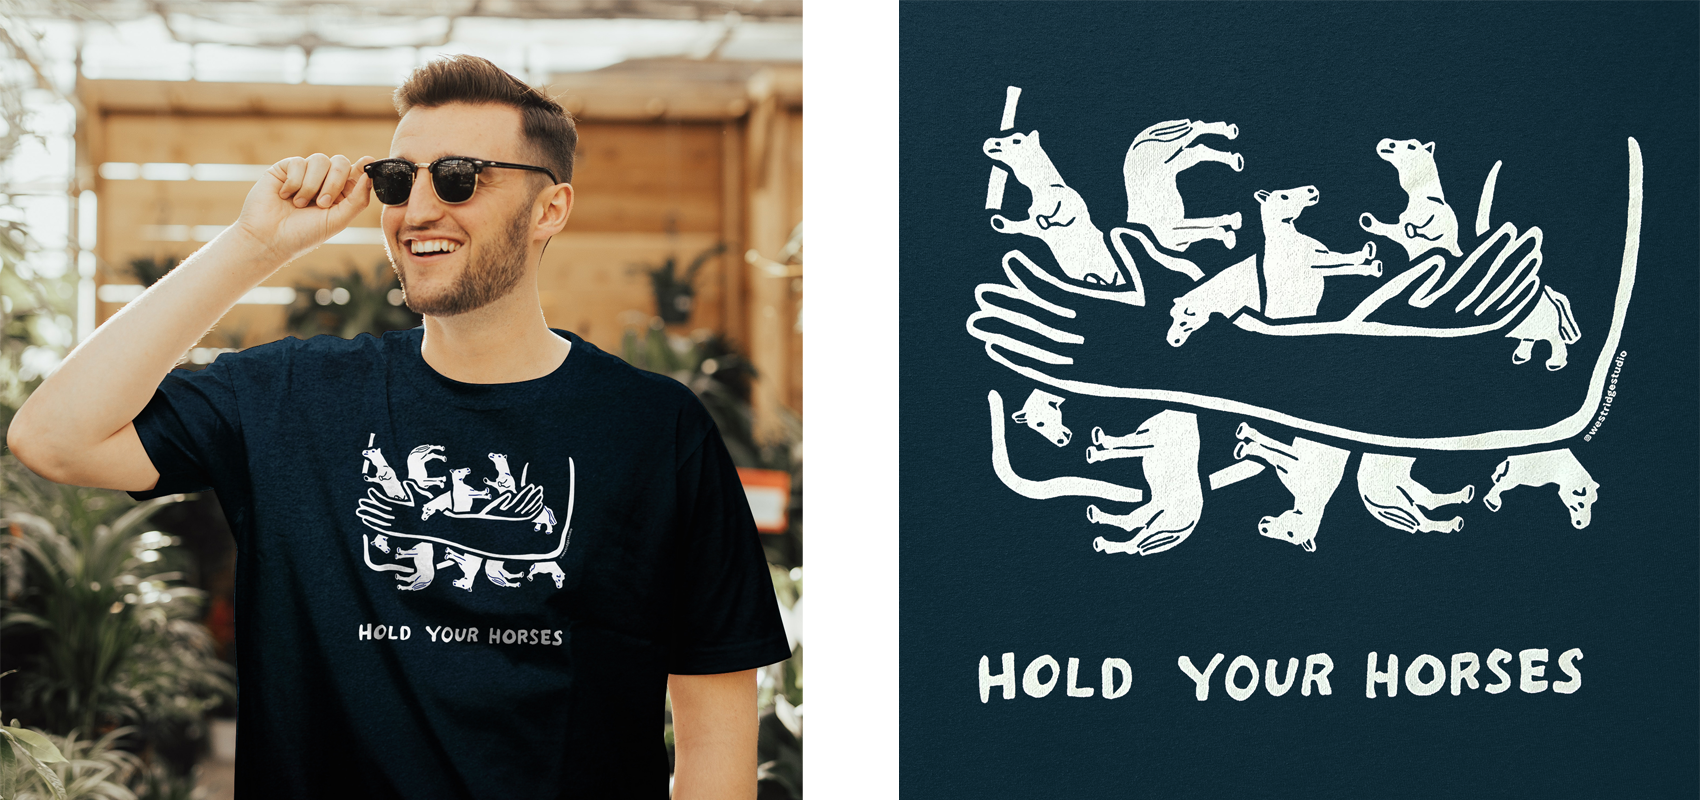 Gifts for horse lovers - men's t-shirt with Hold Your Horses graphic